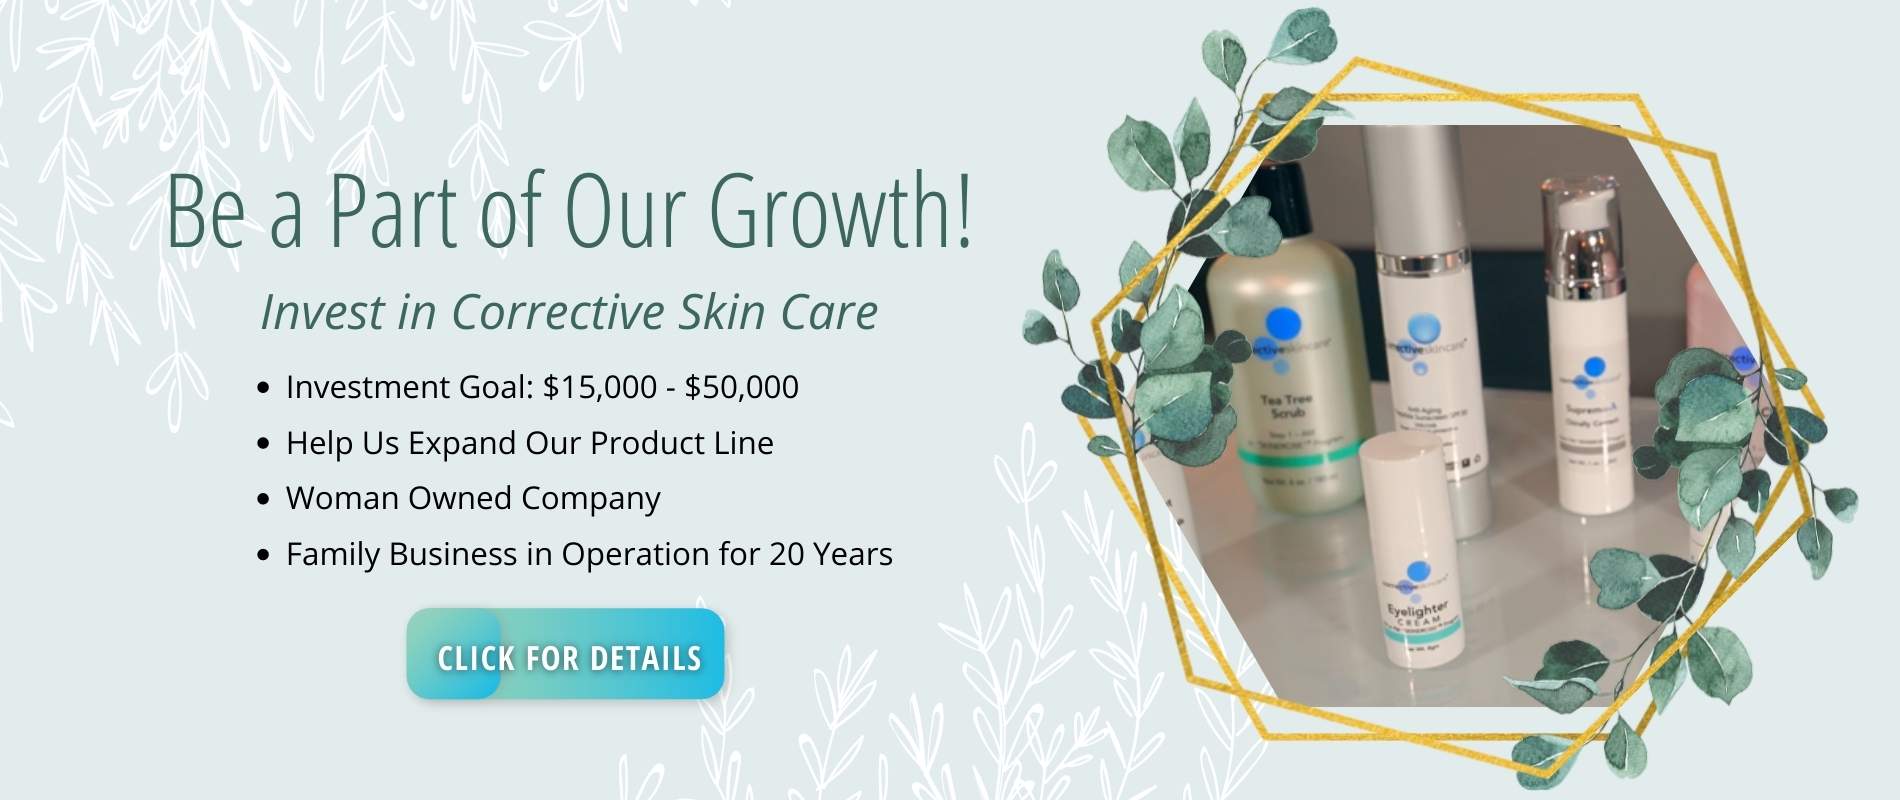 Be a Part of Our Growth! Invest in Corrective Skin Care!